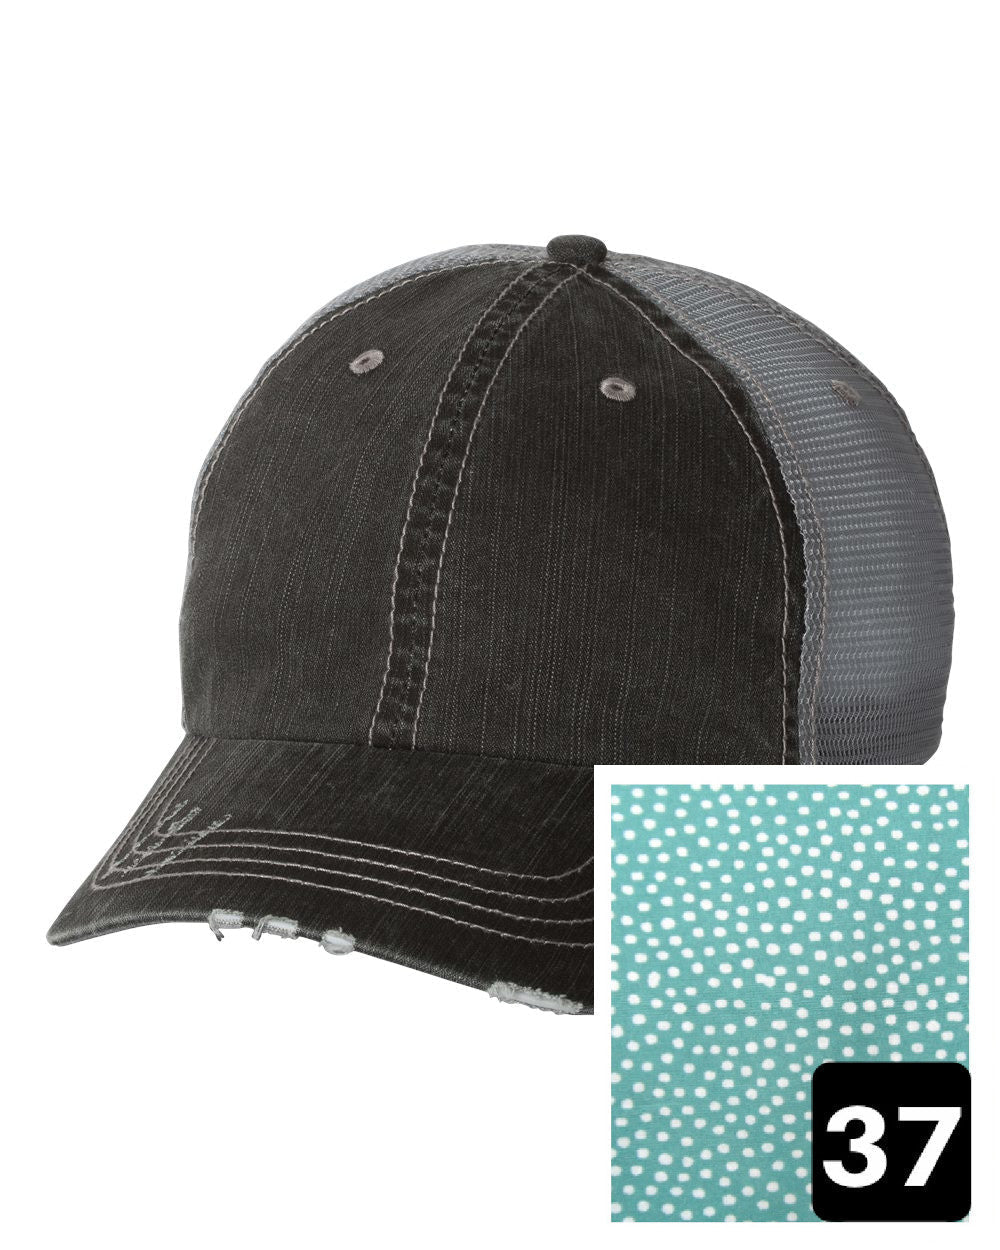 gray distressed trucker hat with gray polka dot fabric state of Maine